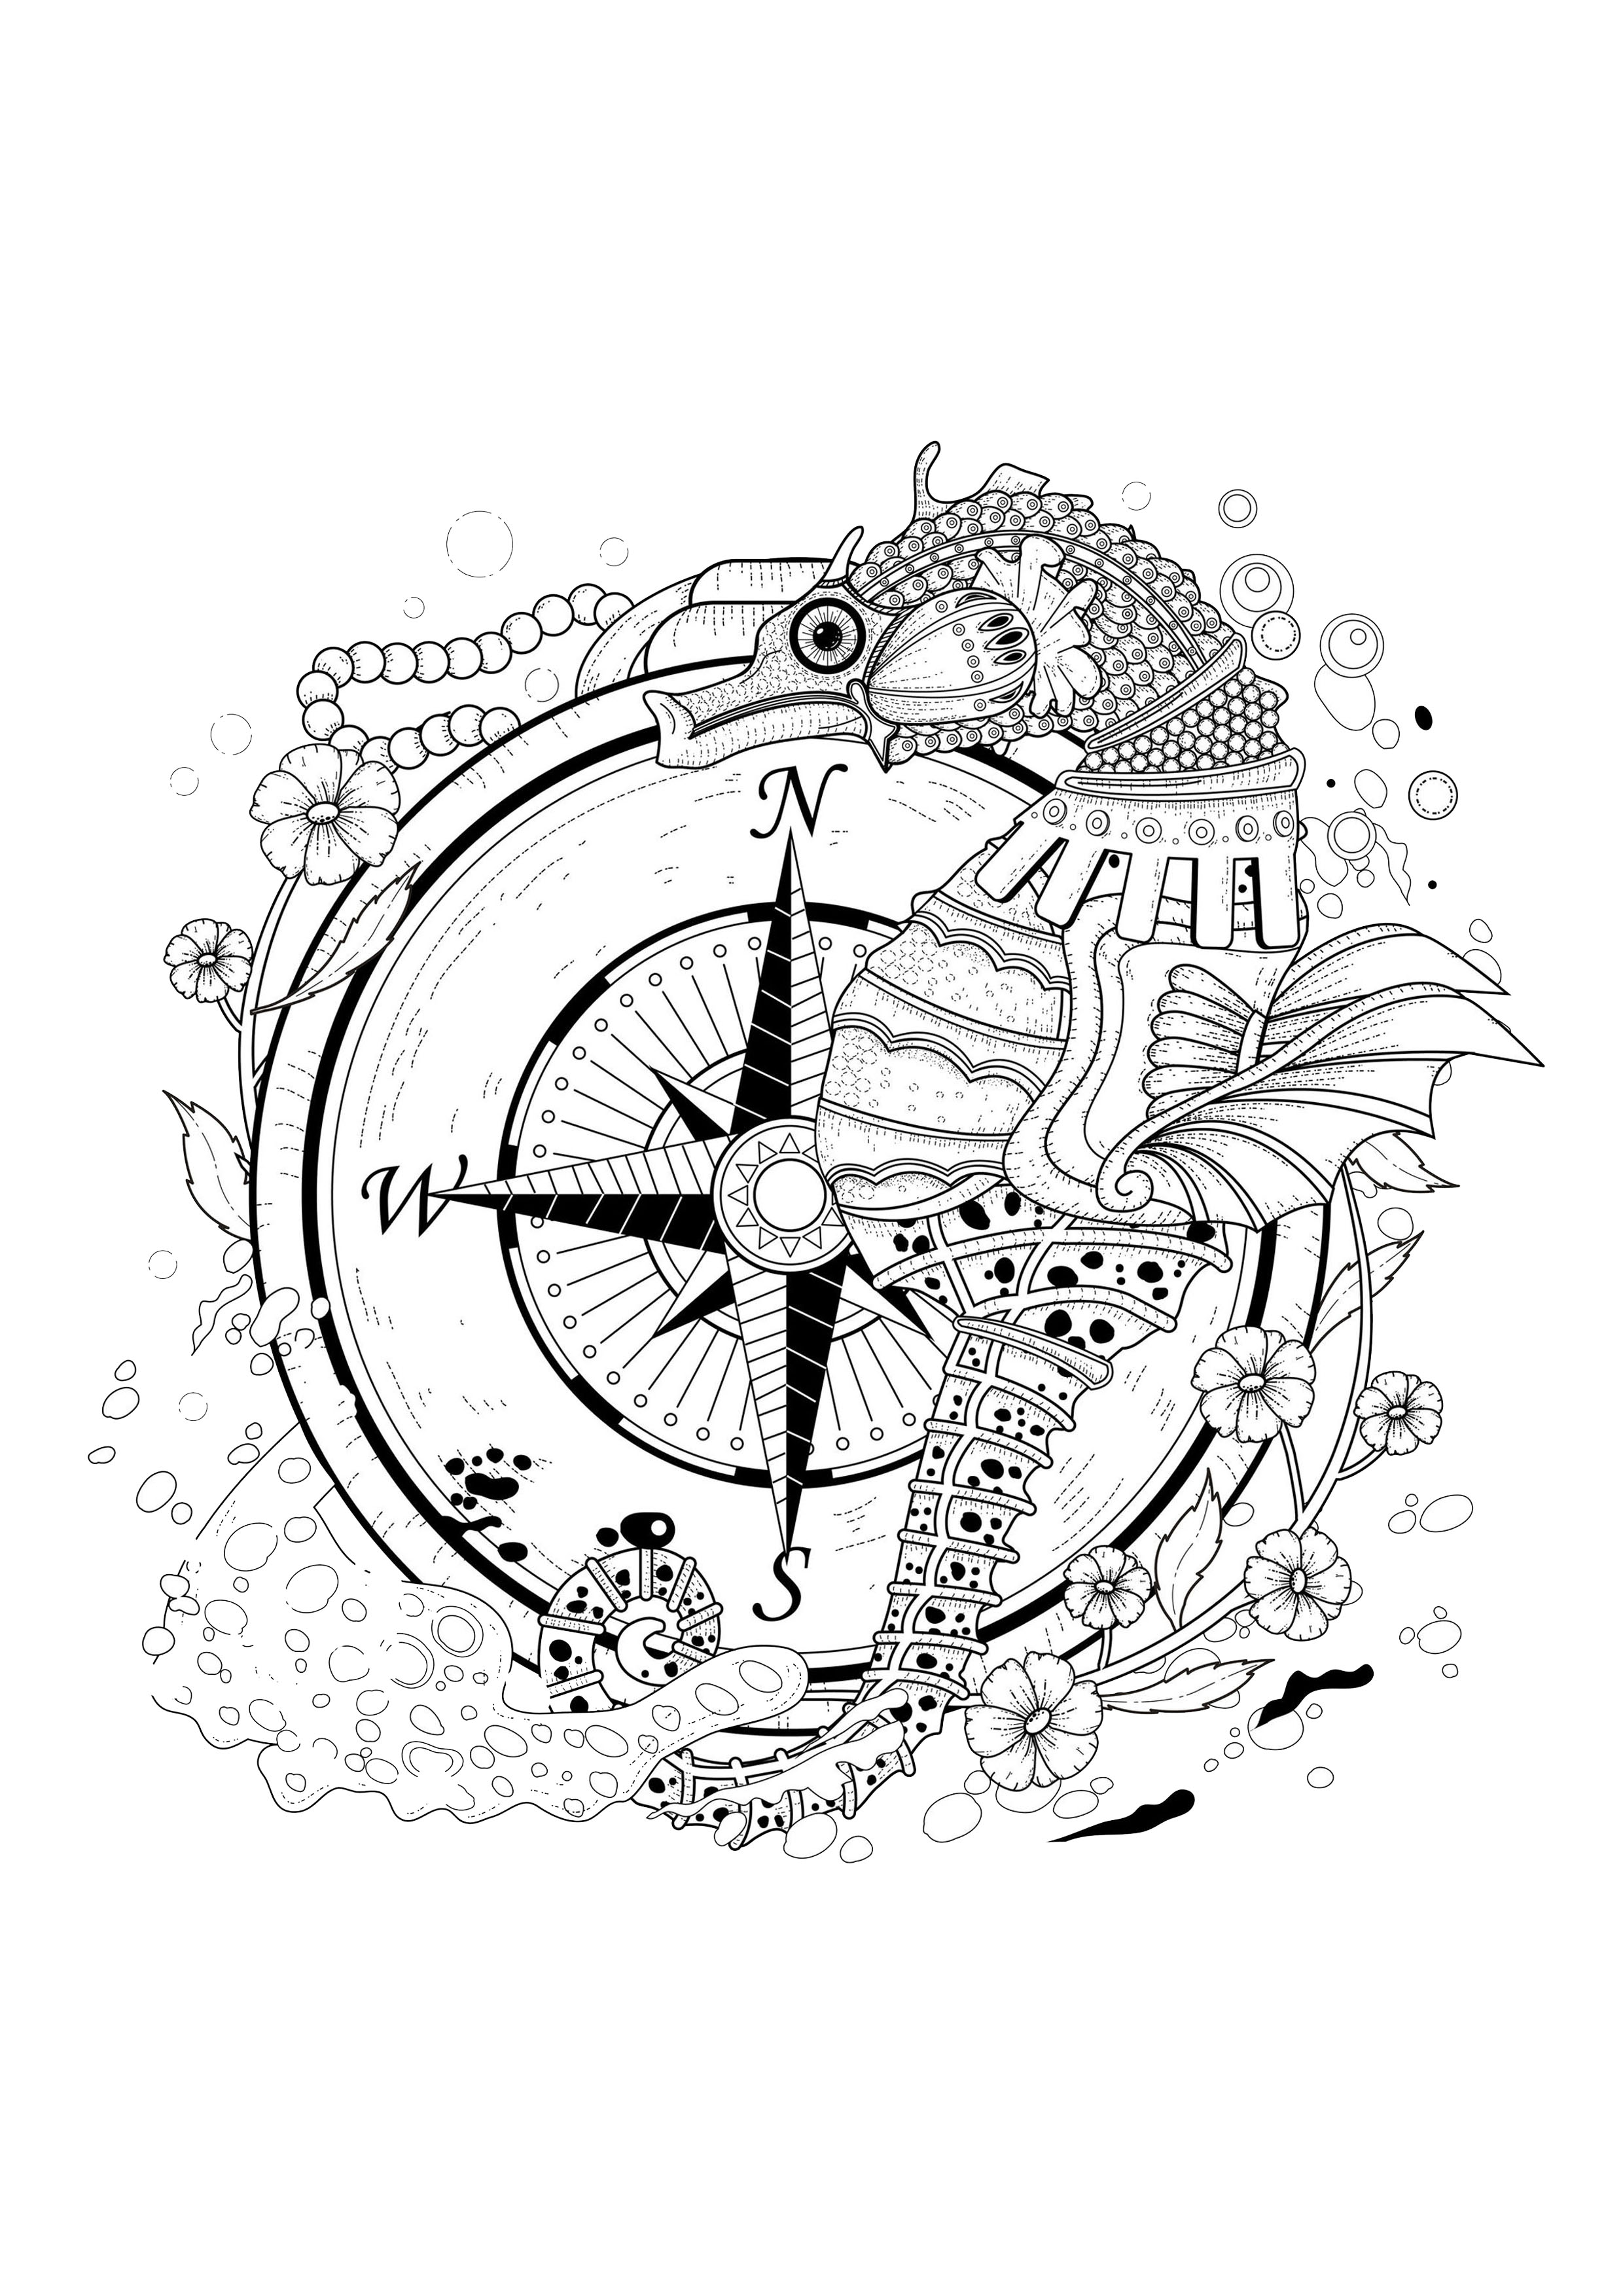 Sea seahorse - Water worlds Adult Coloring Pages